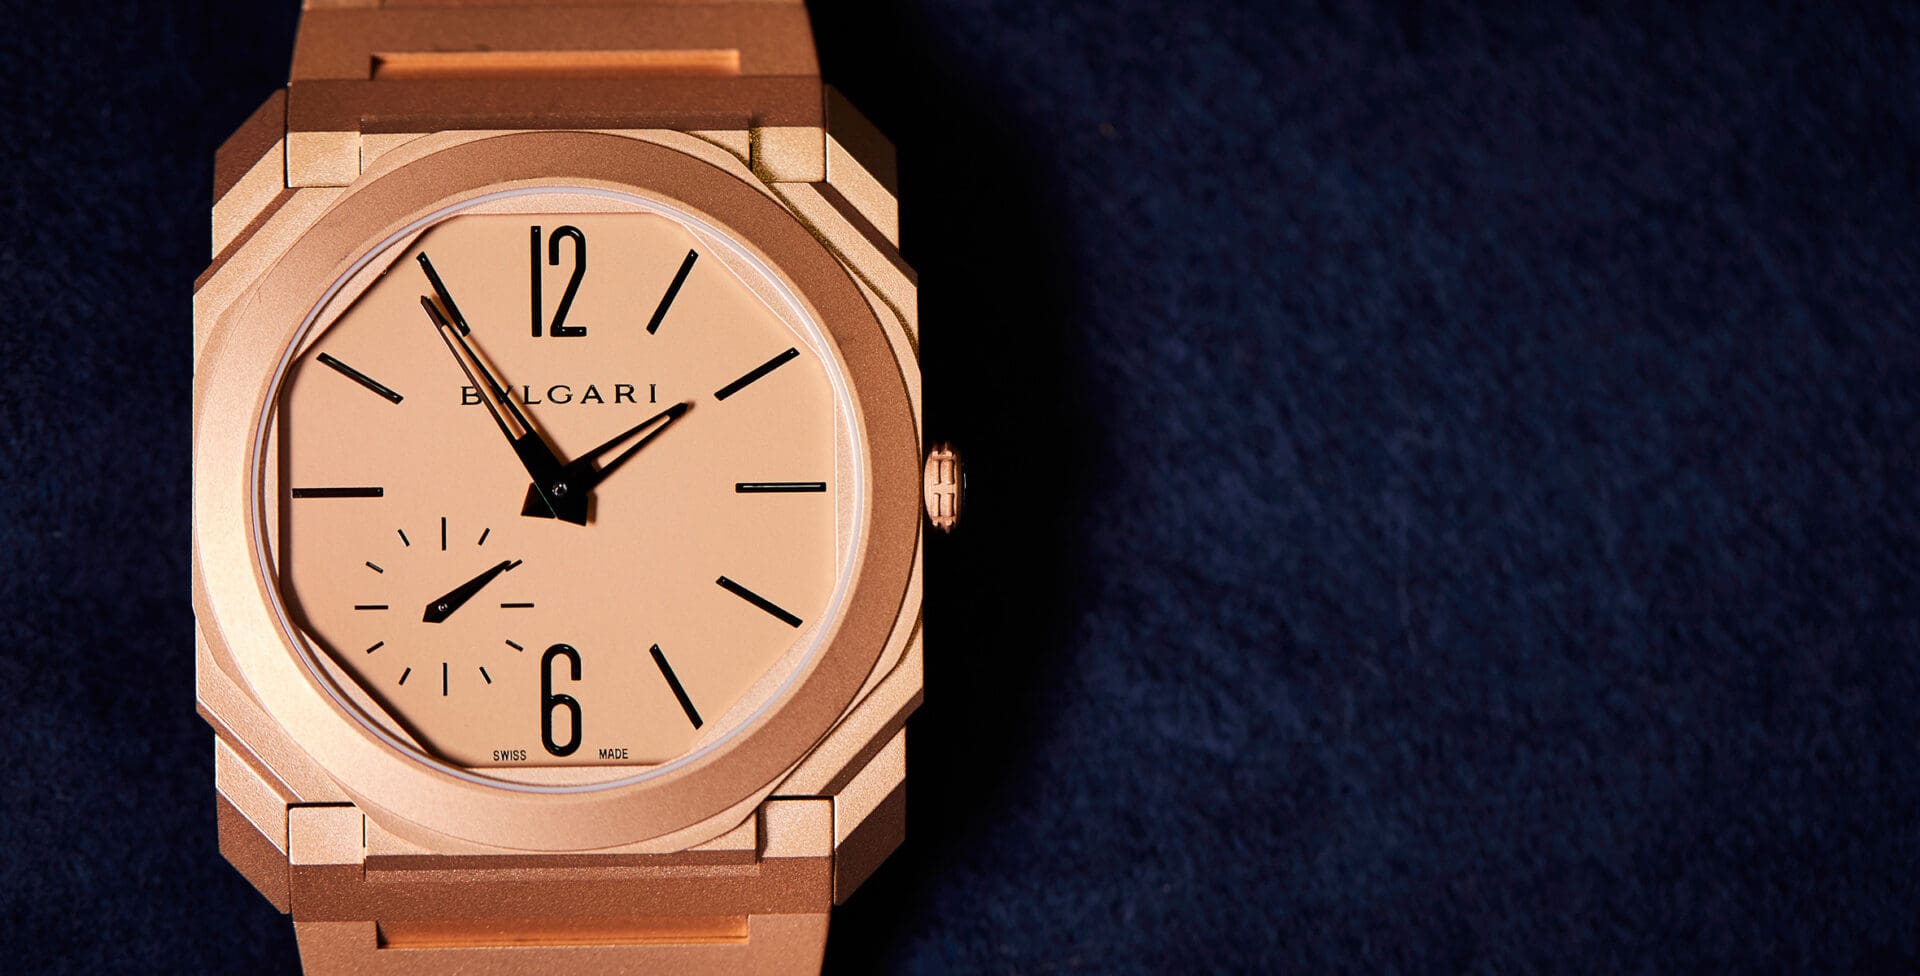 IN-DEPTH: Ultra-thin heavyweight – the Bulgari Octo Finissimo Automatic in gold 